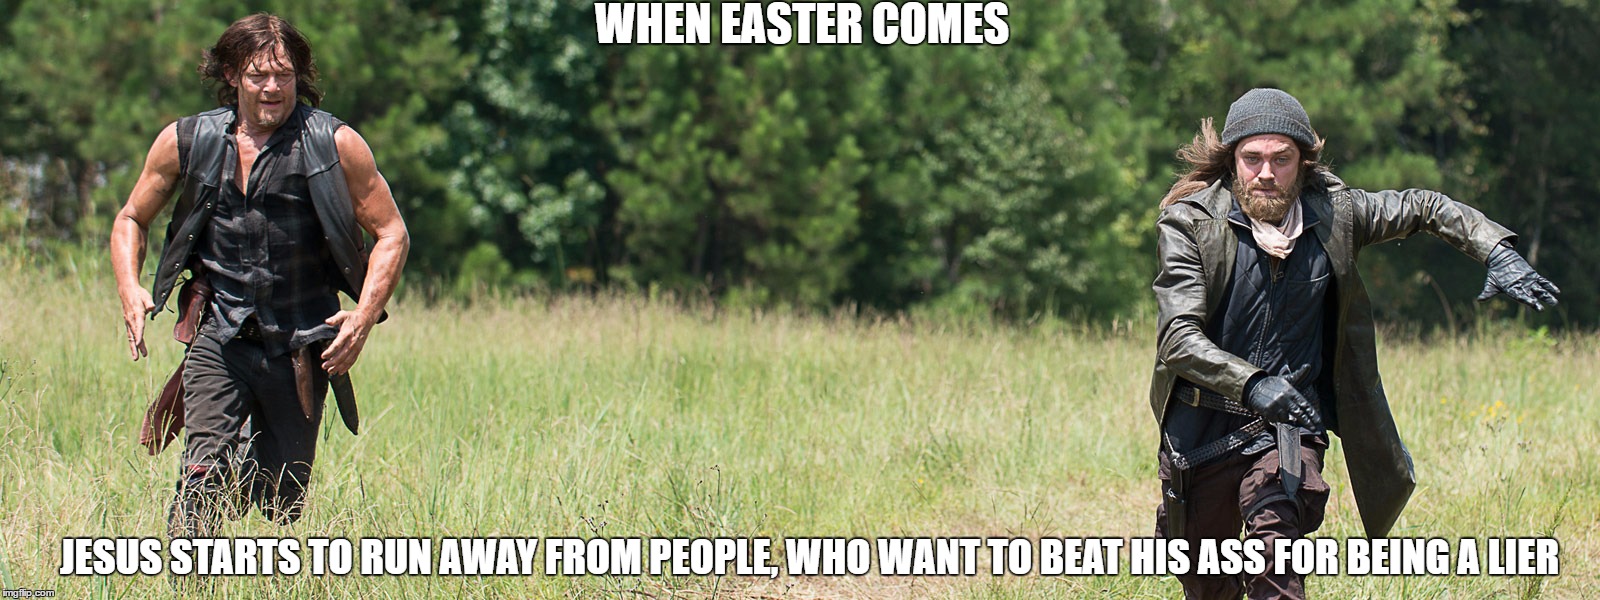 Daryl chasing Jesus | WHEN EASTER COMES; JESUS STARTS TO RUN AWAY FROM PEOPLE, WHO WANT TO BEAT HIS ASS FOR BEING A LIER | image tagged in thewalkingdead,daryl,jesus,funny,easter | made w/ Imgflip meme maker